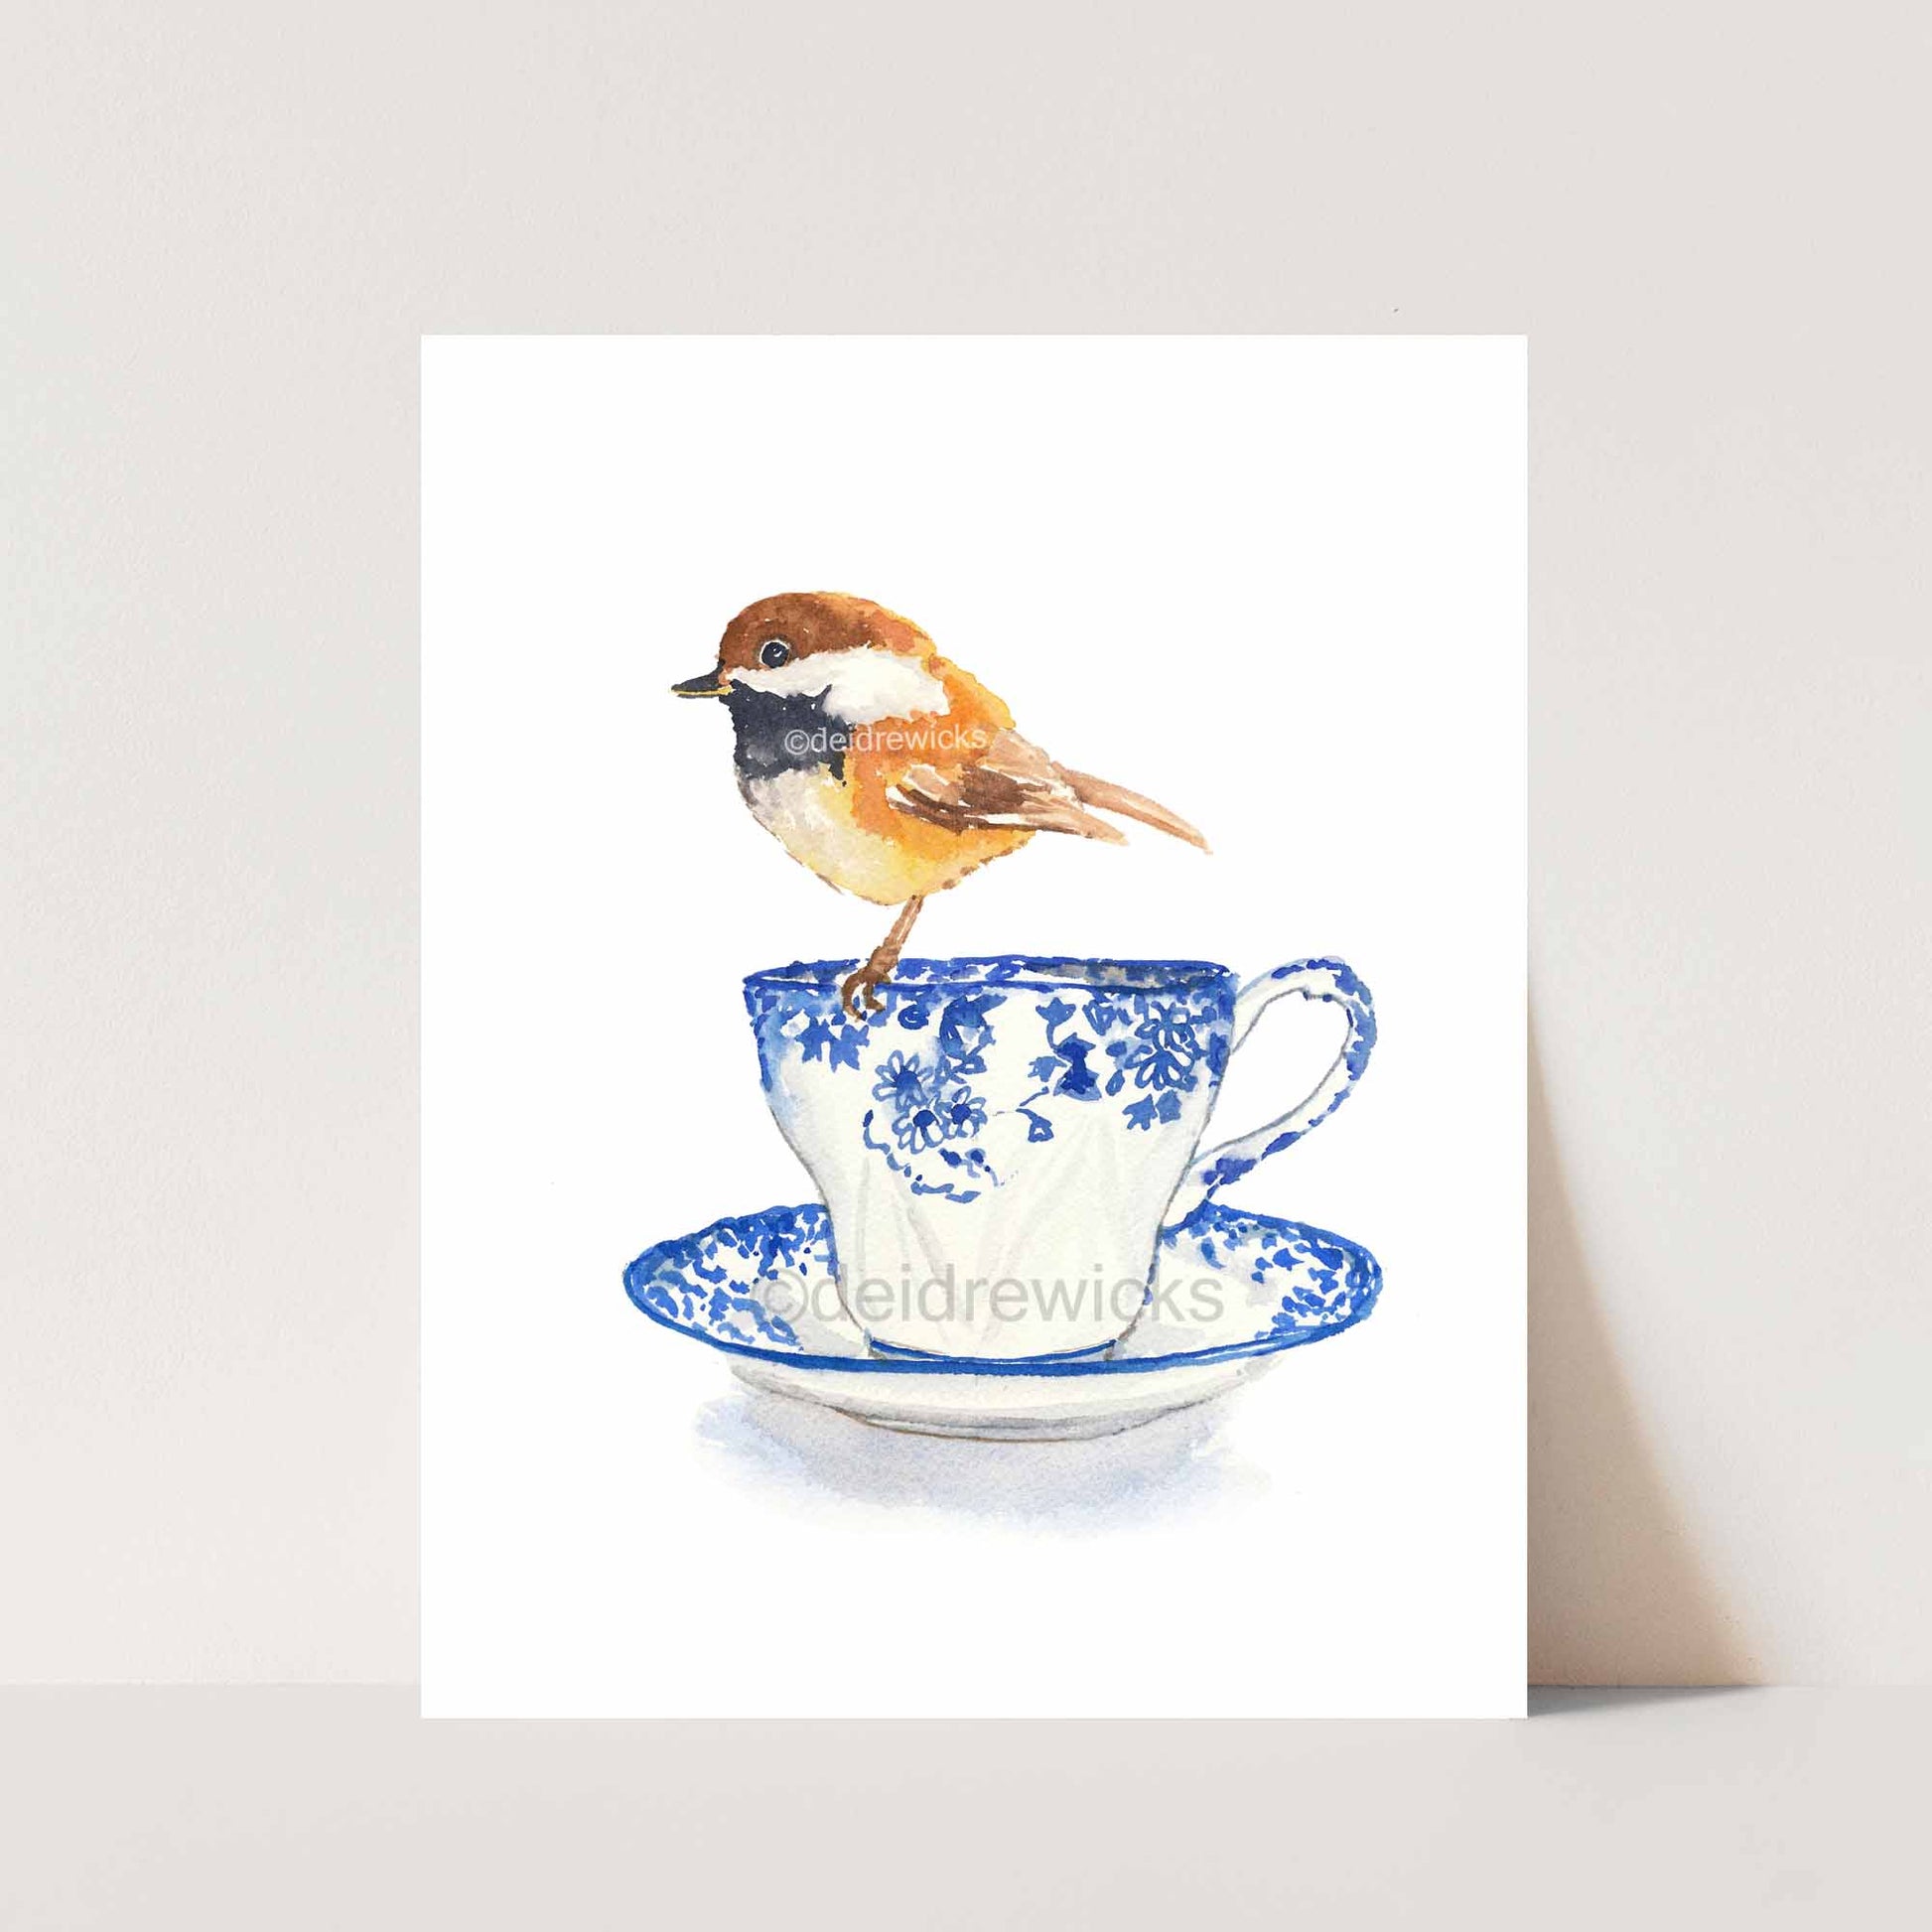 Watercolor of a chestnut backed chickadee sitting on a blue flowered vintage teacup